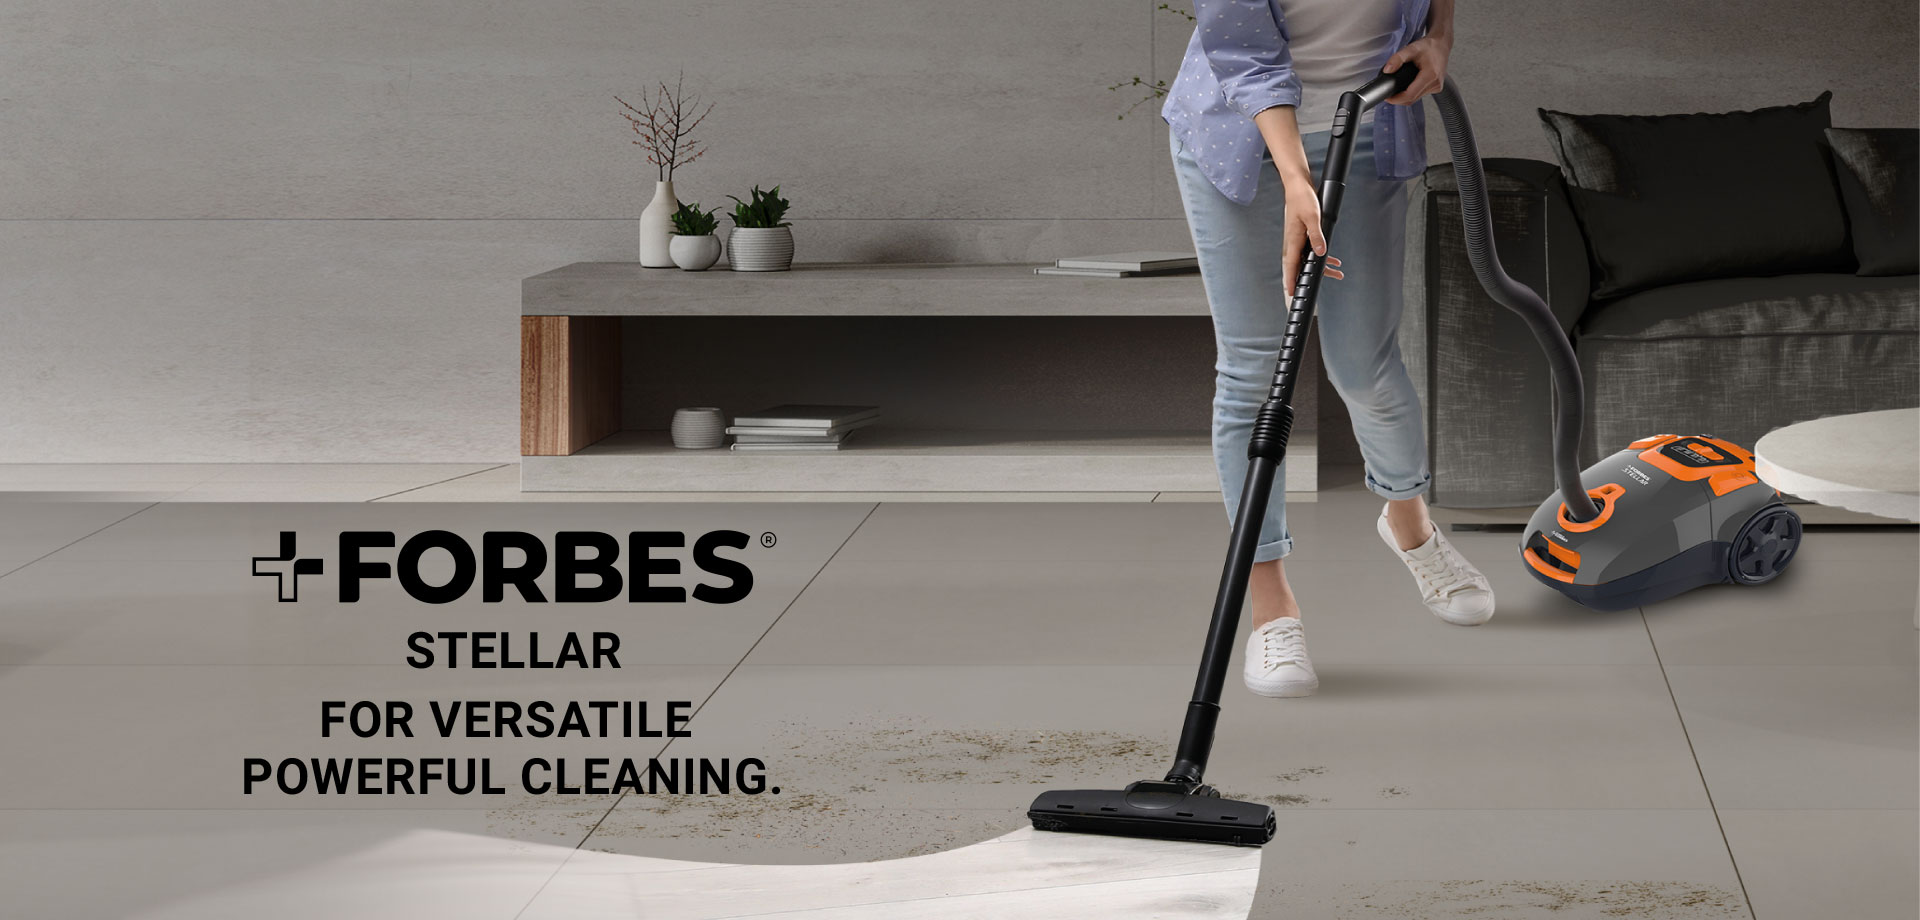 FORBES STELLAR FOR VERSATILE POWERFUL CLEANING